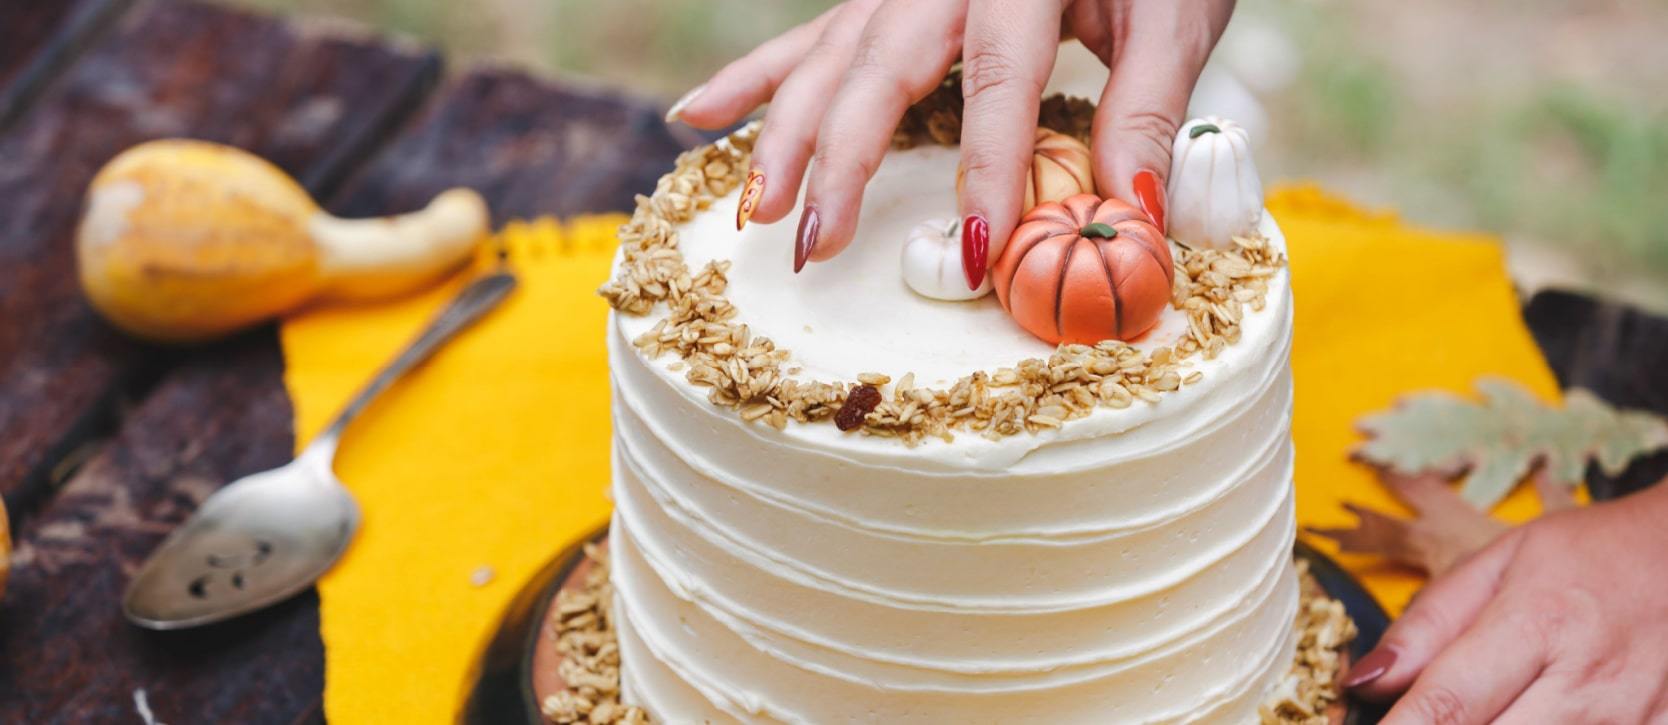 Cake being decorated with fall decorations